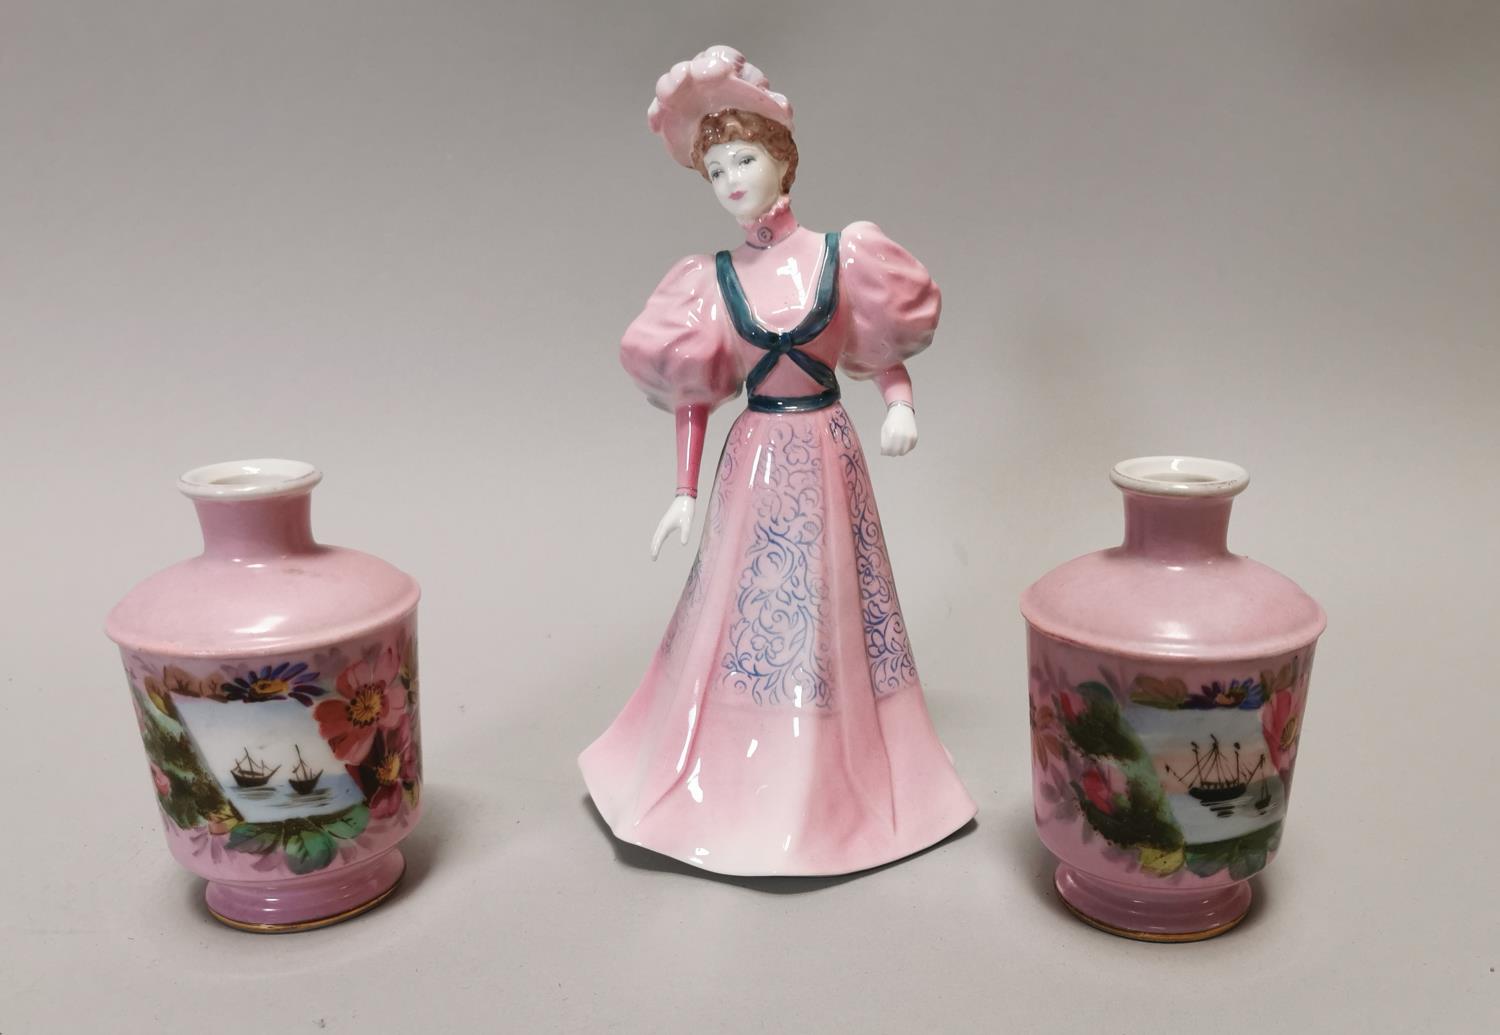 Two 19th C. hand painted ceramic vases and figure.